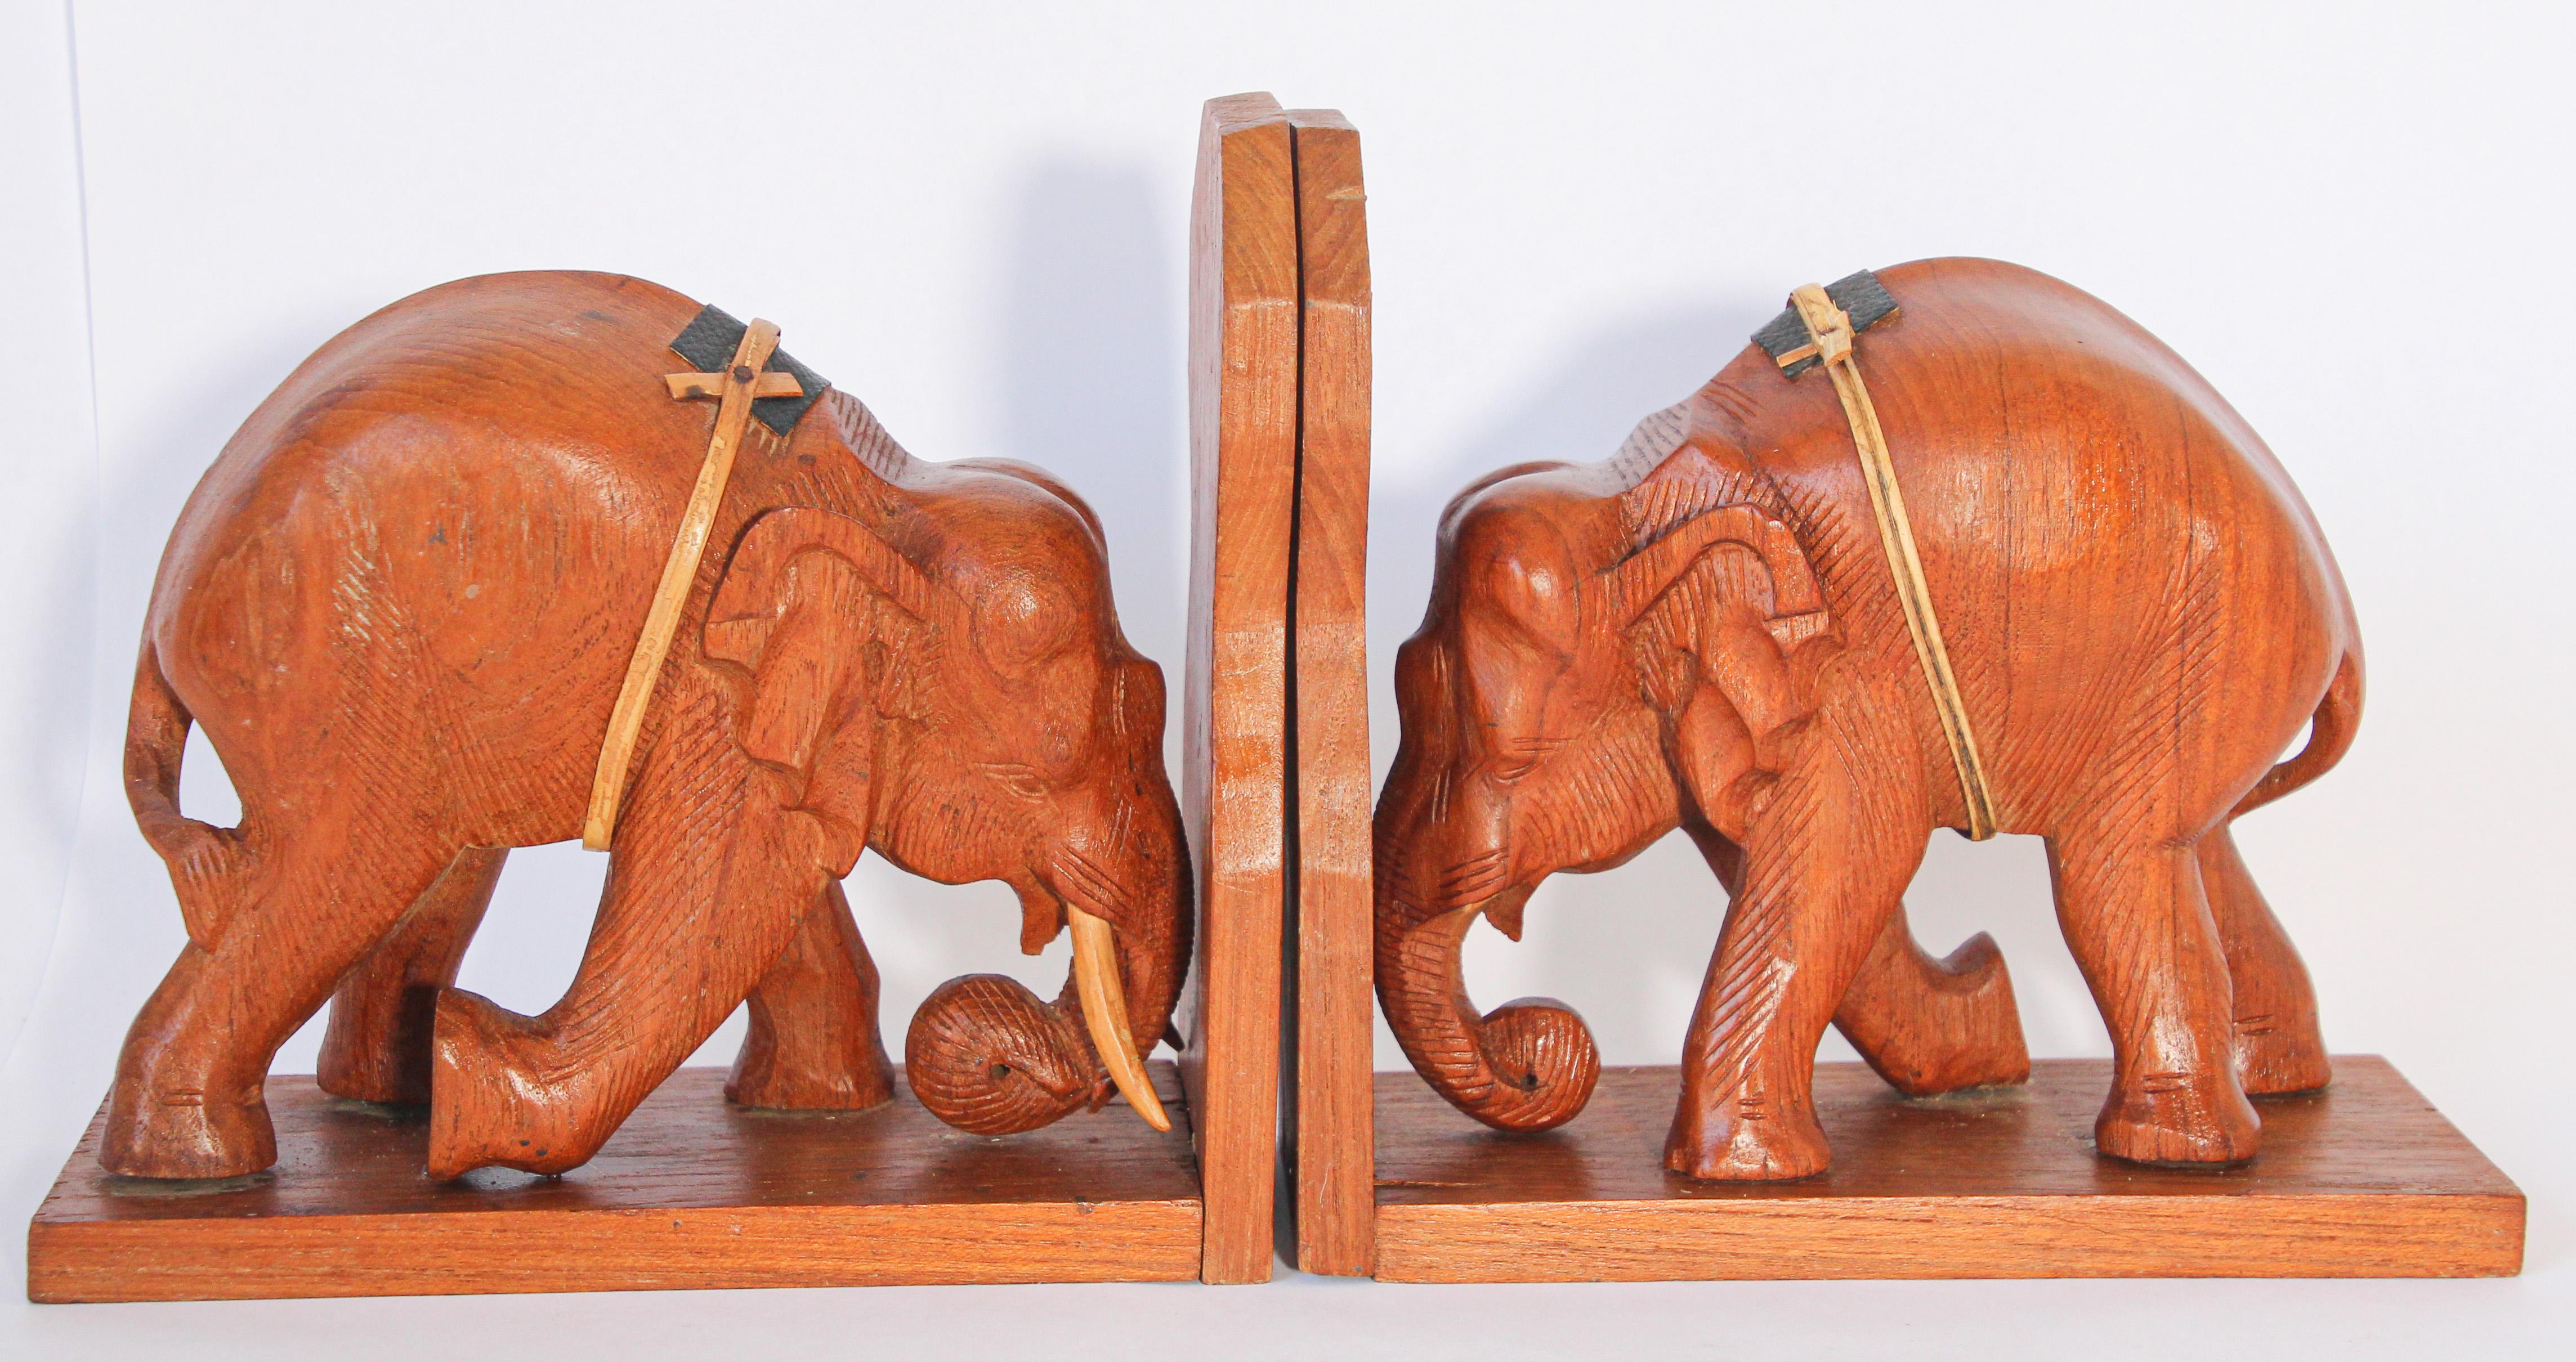 Nice pair of hand carved wooden Asian elephant bookends.
One of the elephant is missing his tusks.
Fine detailed hand carved elephant bookends with tusk down, for Asian this represent good health in Fen Shui.
These are hand carved and therefore